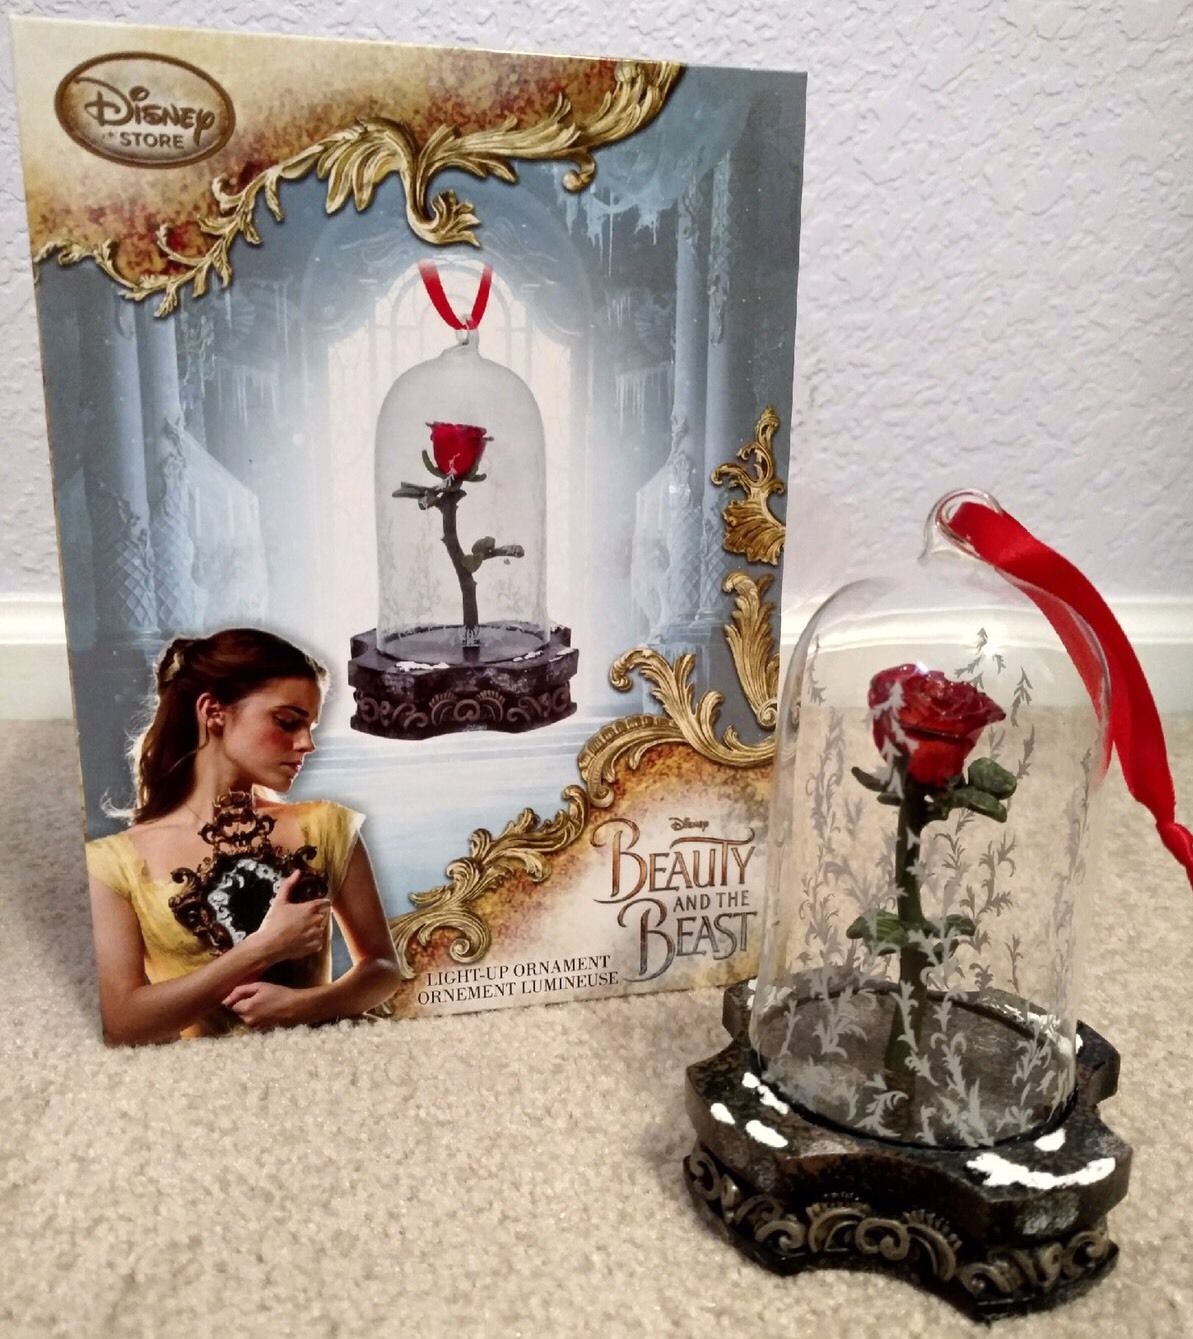 Light Up Rose Ornament Beauty And The Beast Disney Store 2017